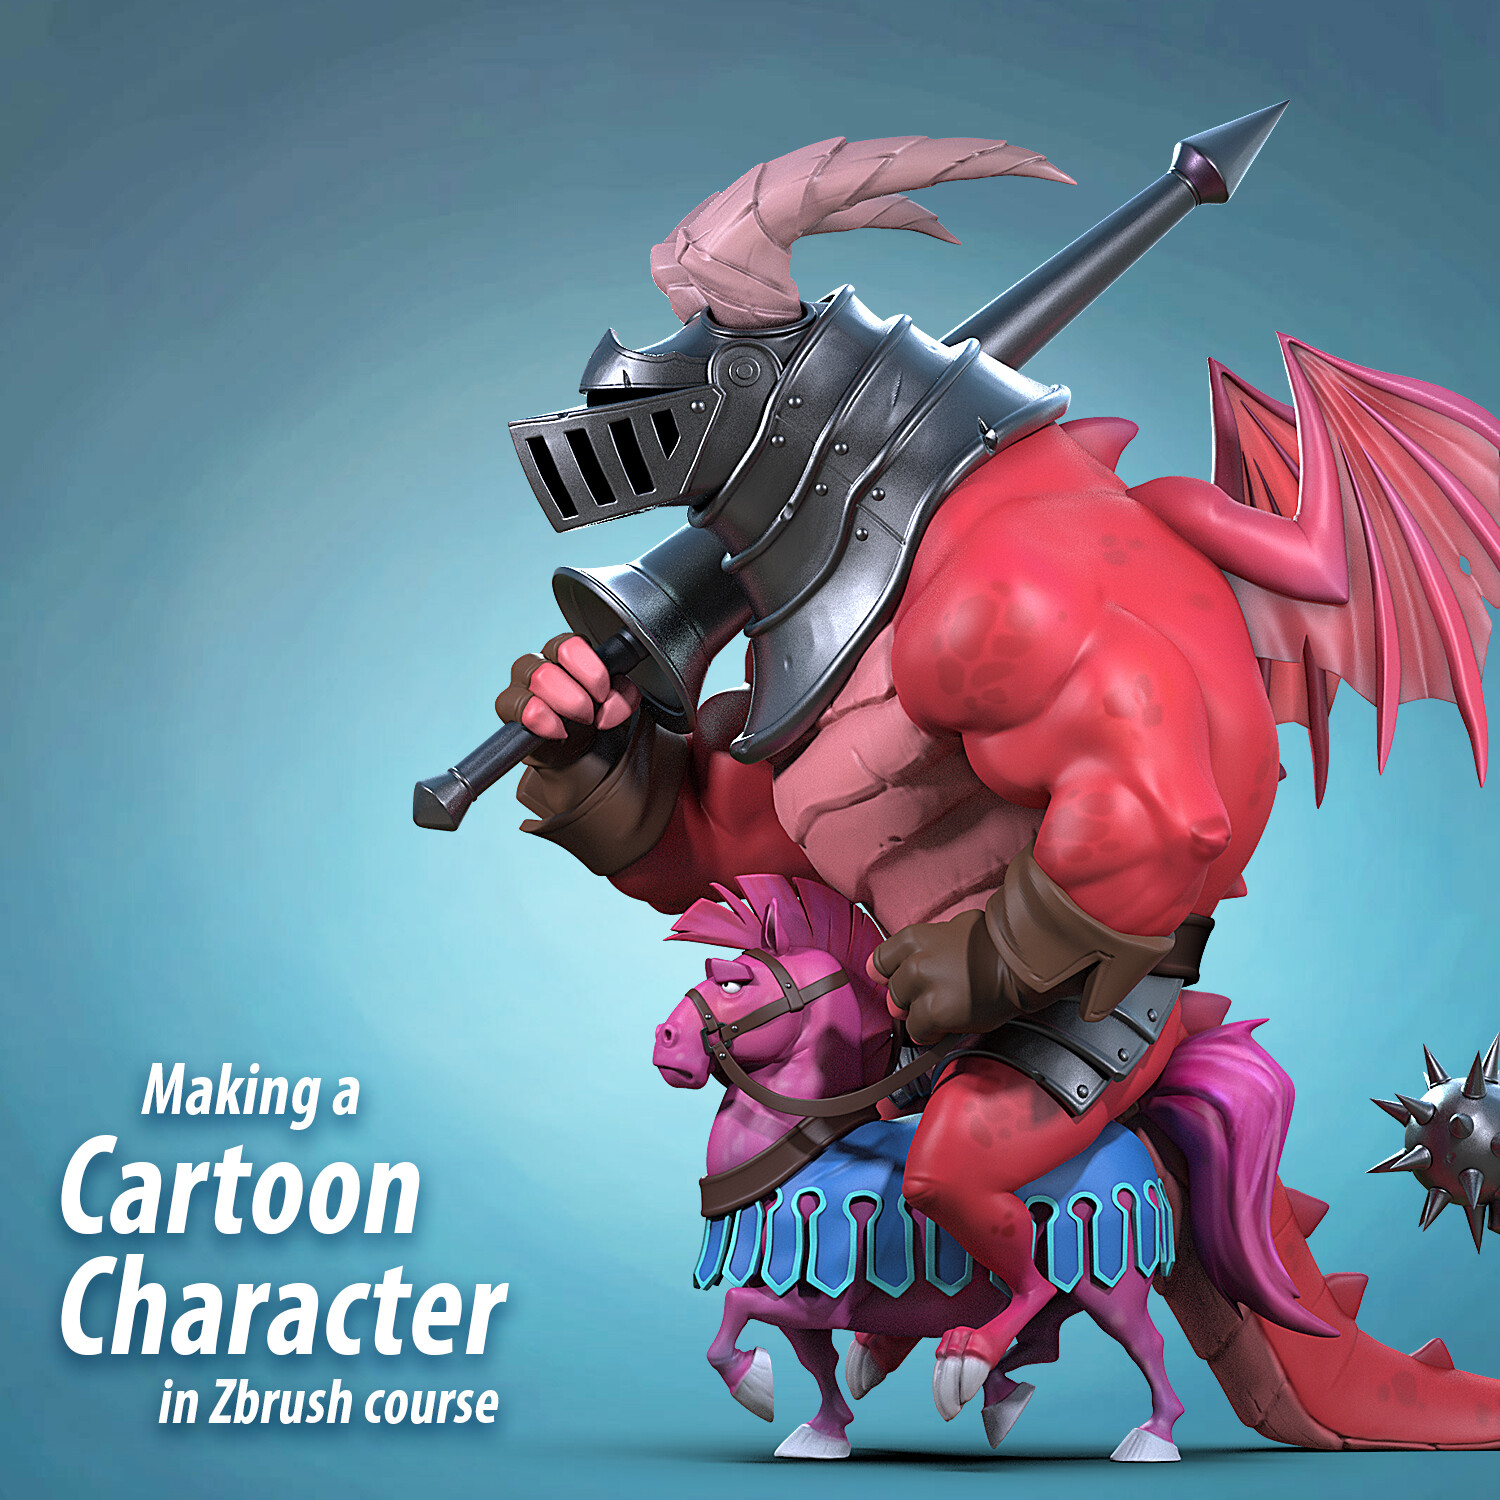 making a cartoon character in zbrush course by nikolay naydenov